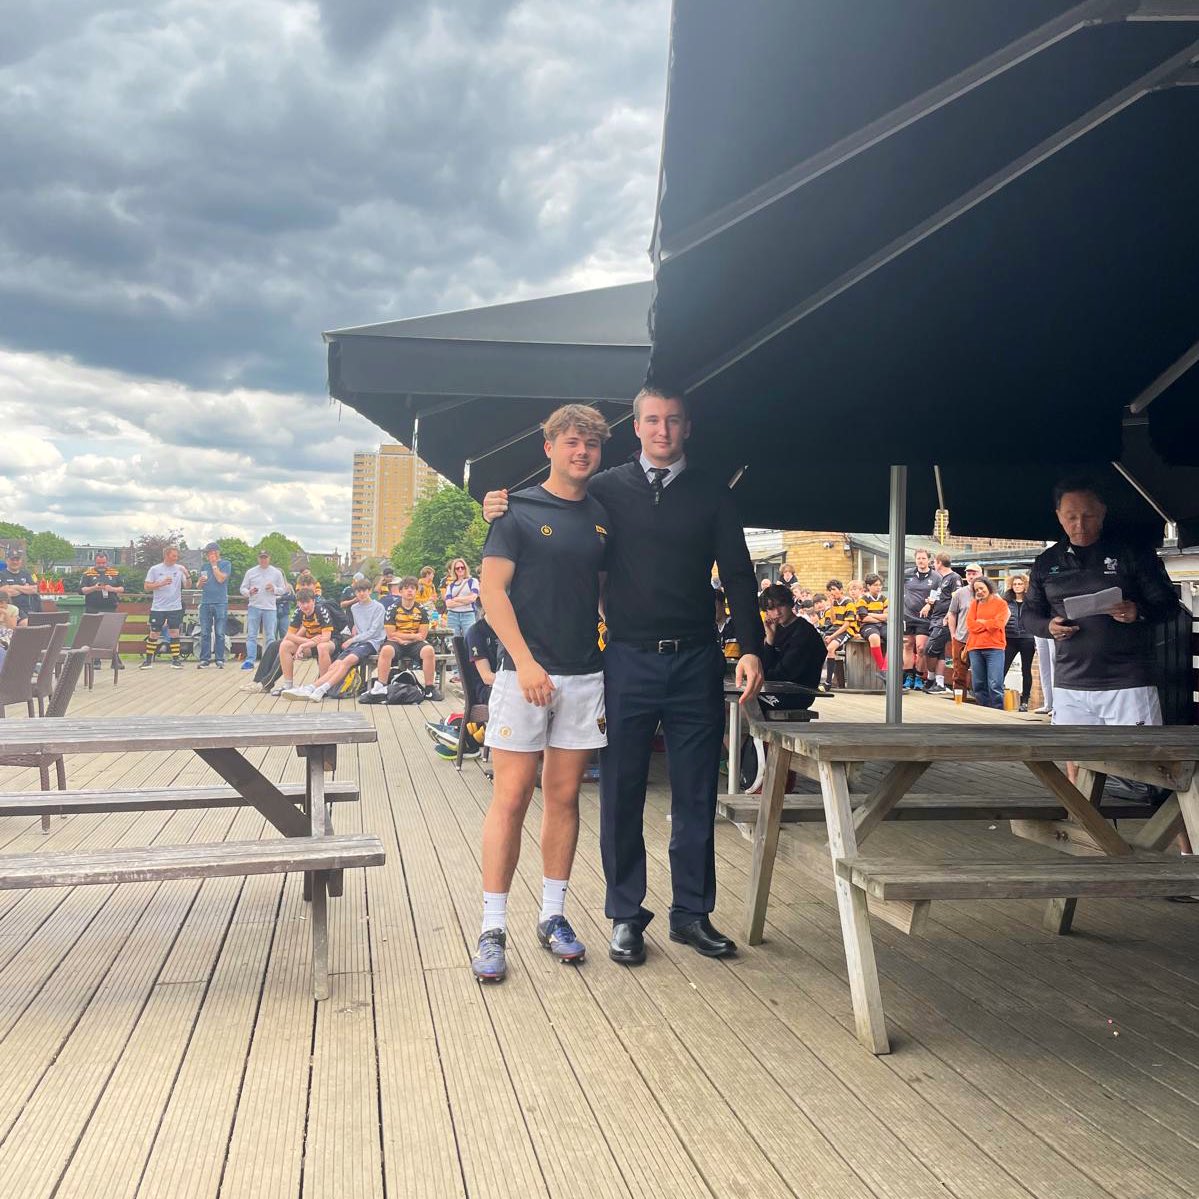 𝗘𝗡𝗗 𝗢𝗙 𝗦𝗘𝗔𝗦𝗢𝗡 𝗬𝗢𝗨𝗧𝗛 𝗔𝗪𝗔𝗥𝗗𝗦 On Sunday 5th May the Wasps Youth Section held its annual End of Season Awards Once a Wasp Always a Wasp! waspsfc.co.uk/news/end-of-se… #Rugby #London #OnceAWasp 🐝